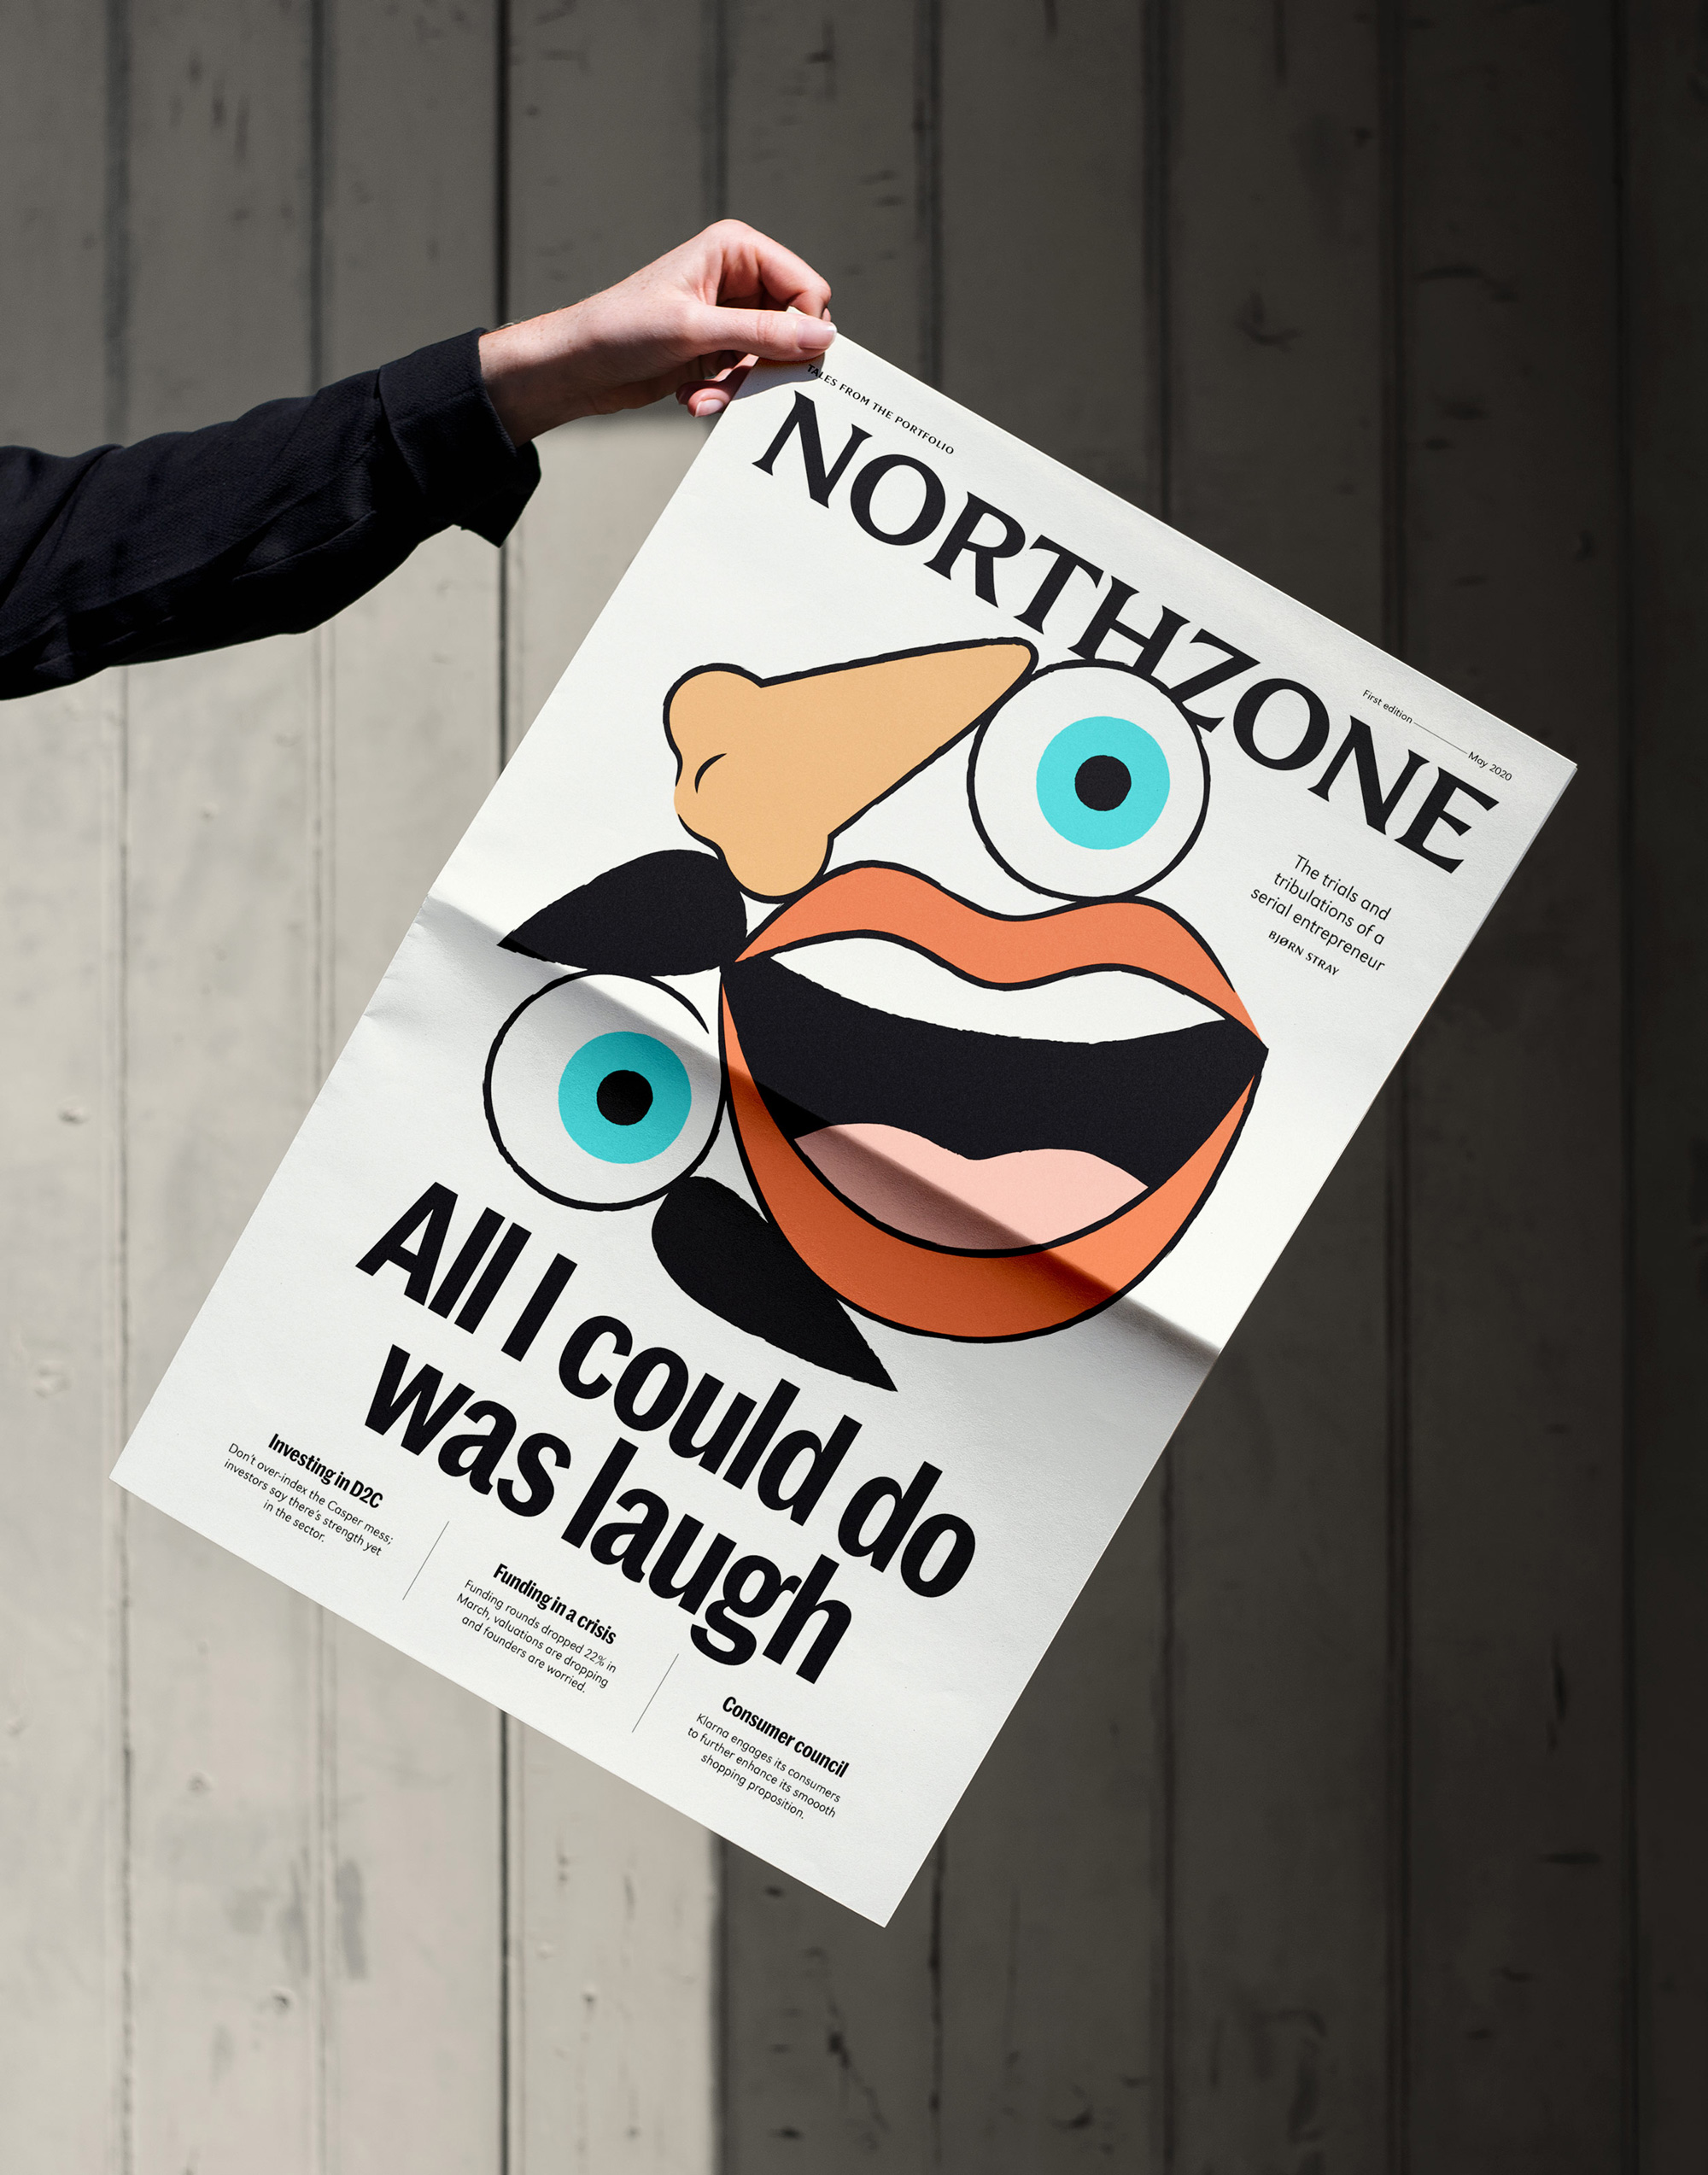 New Logo and Identity for Northzone by Ragged Edge